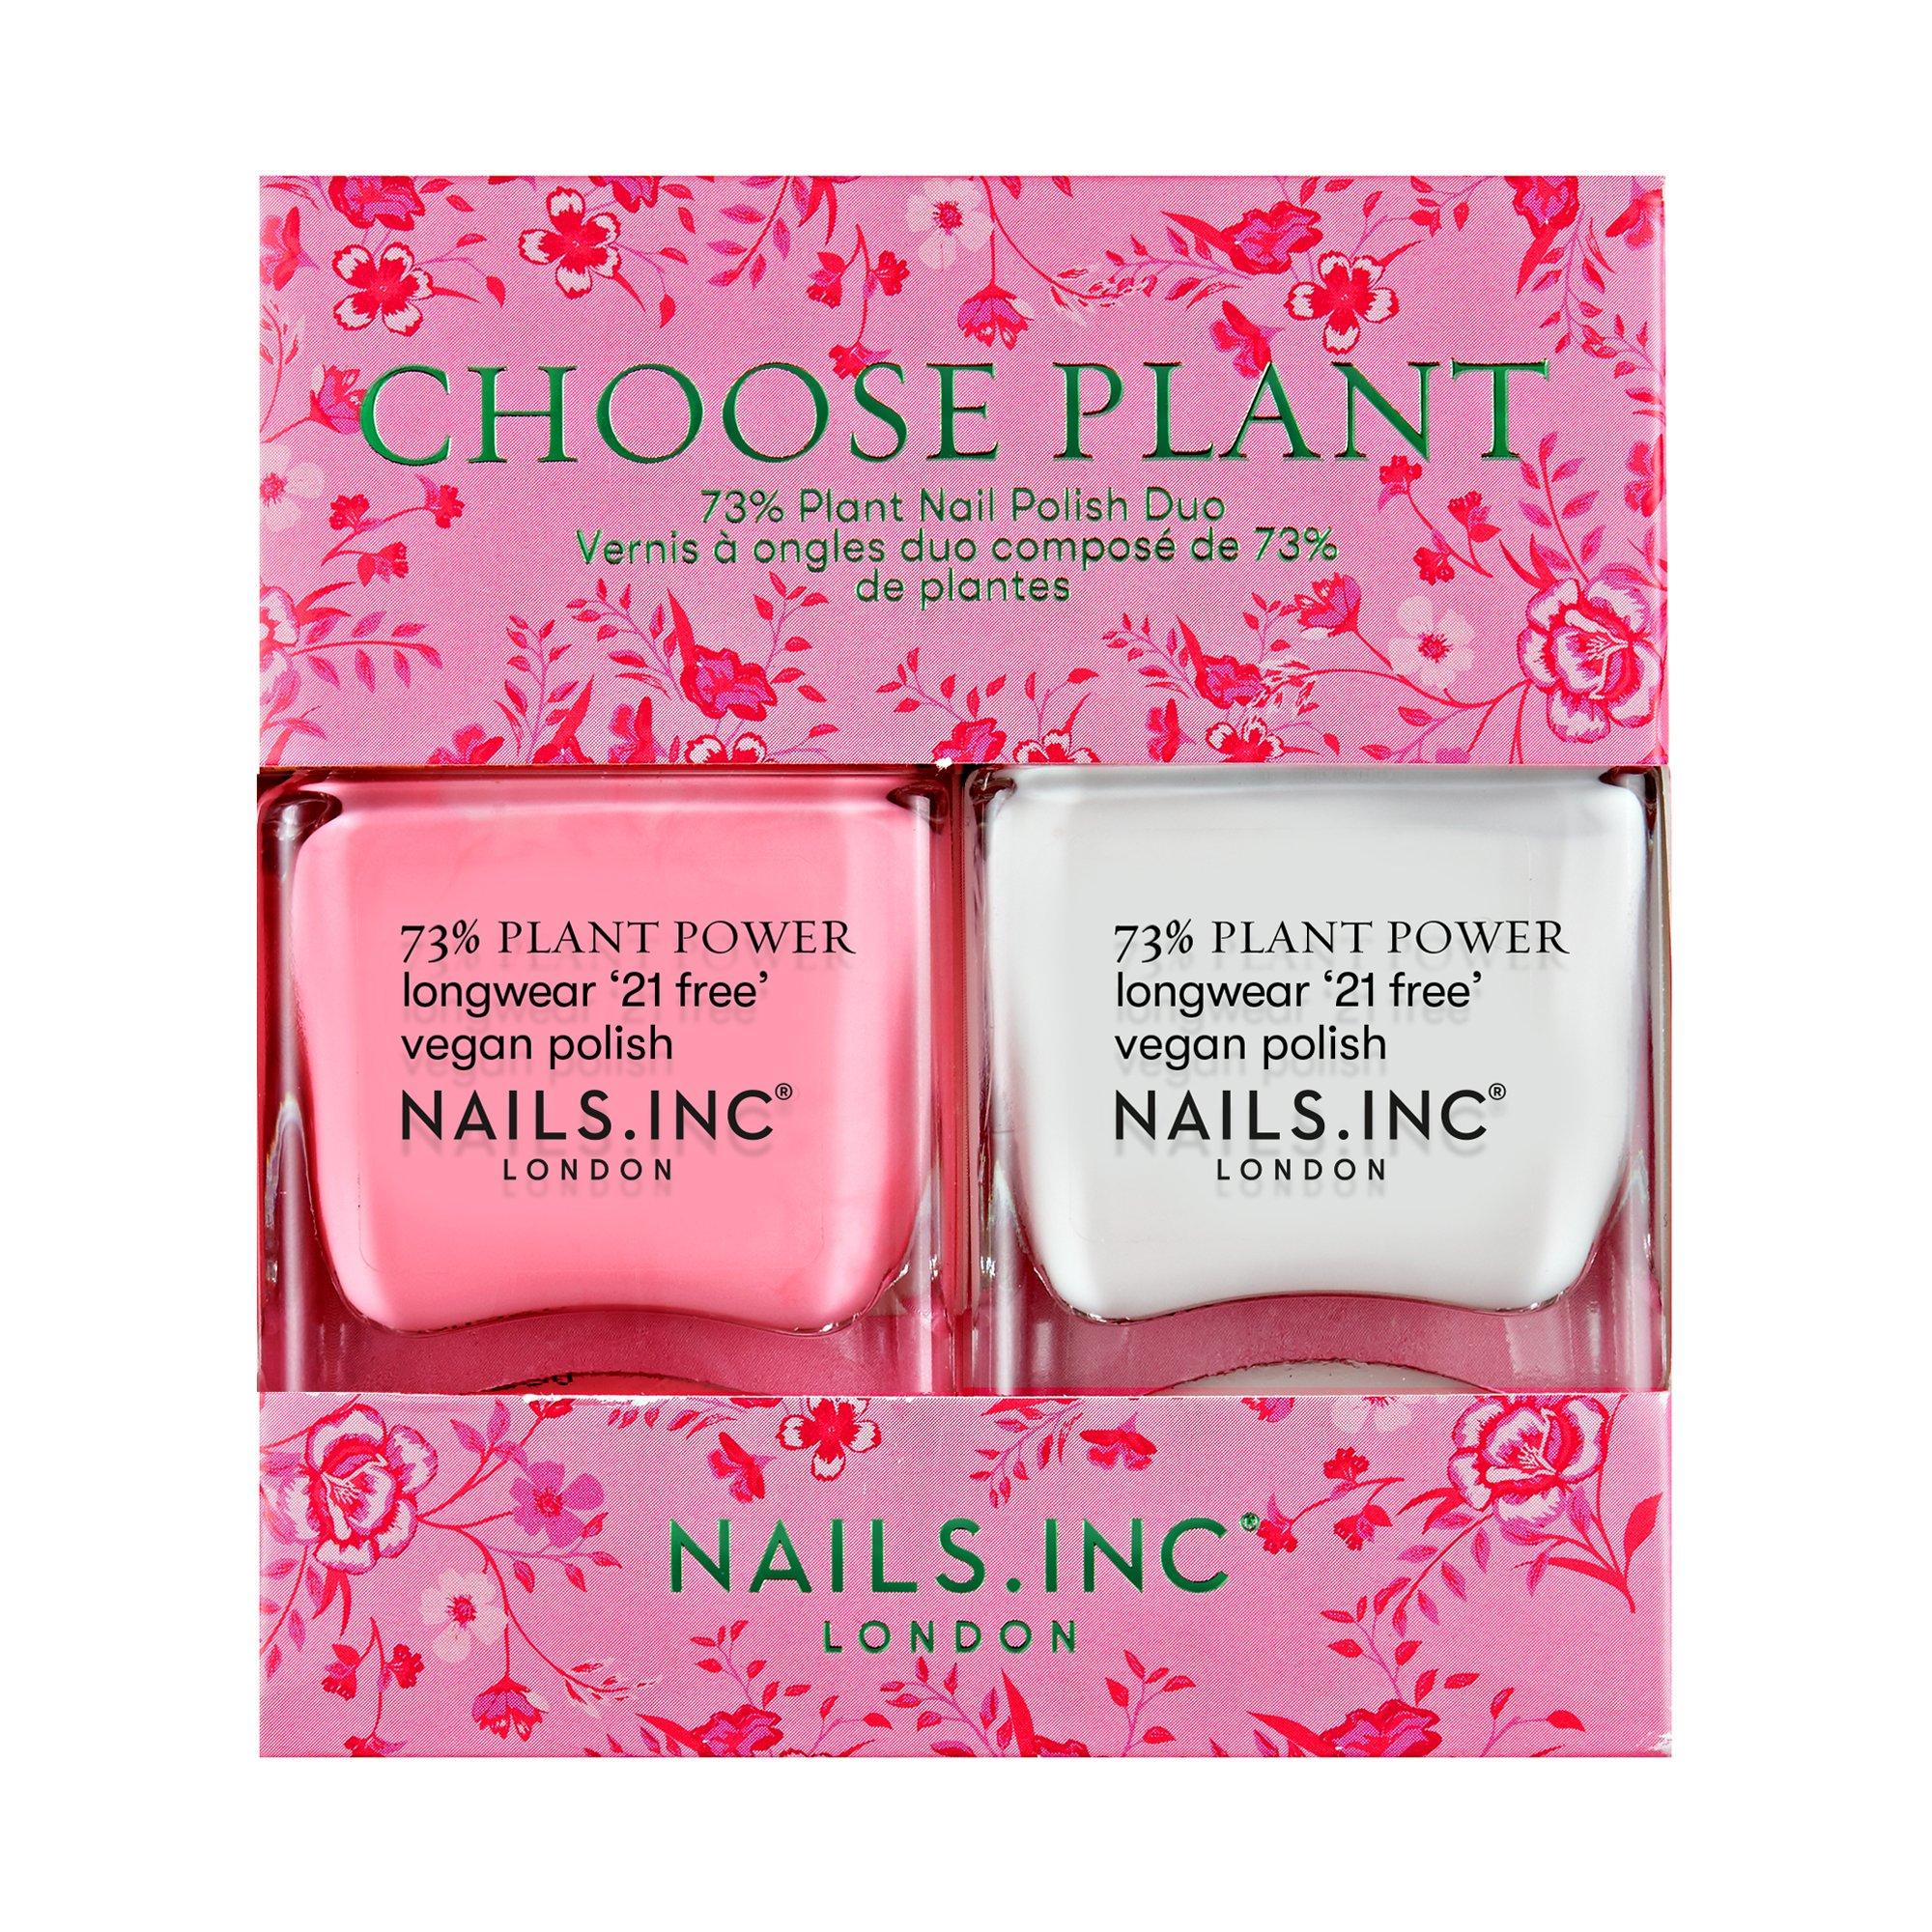 Image of Nails Inc. Choose Plant Duo